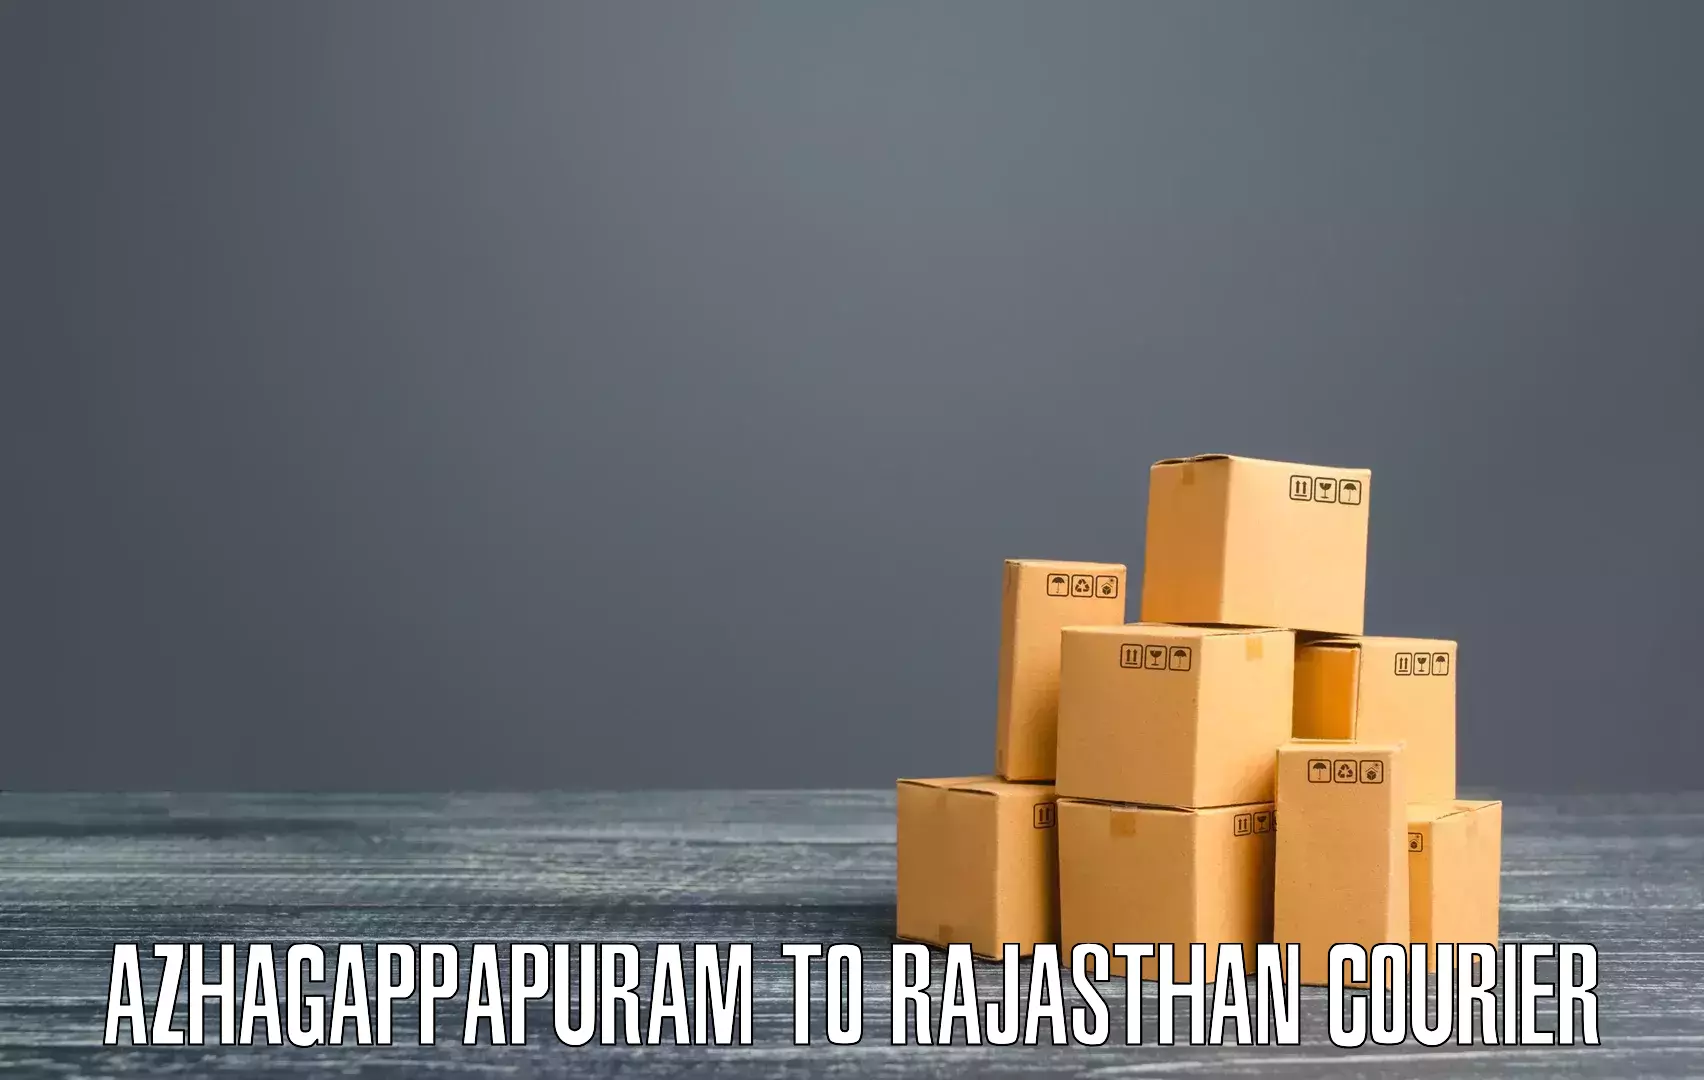 Easy access courier services Azhagappapuram to Rajasthan